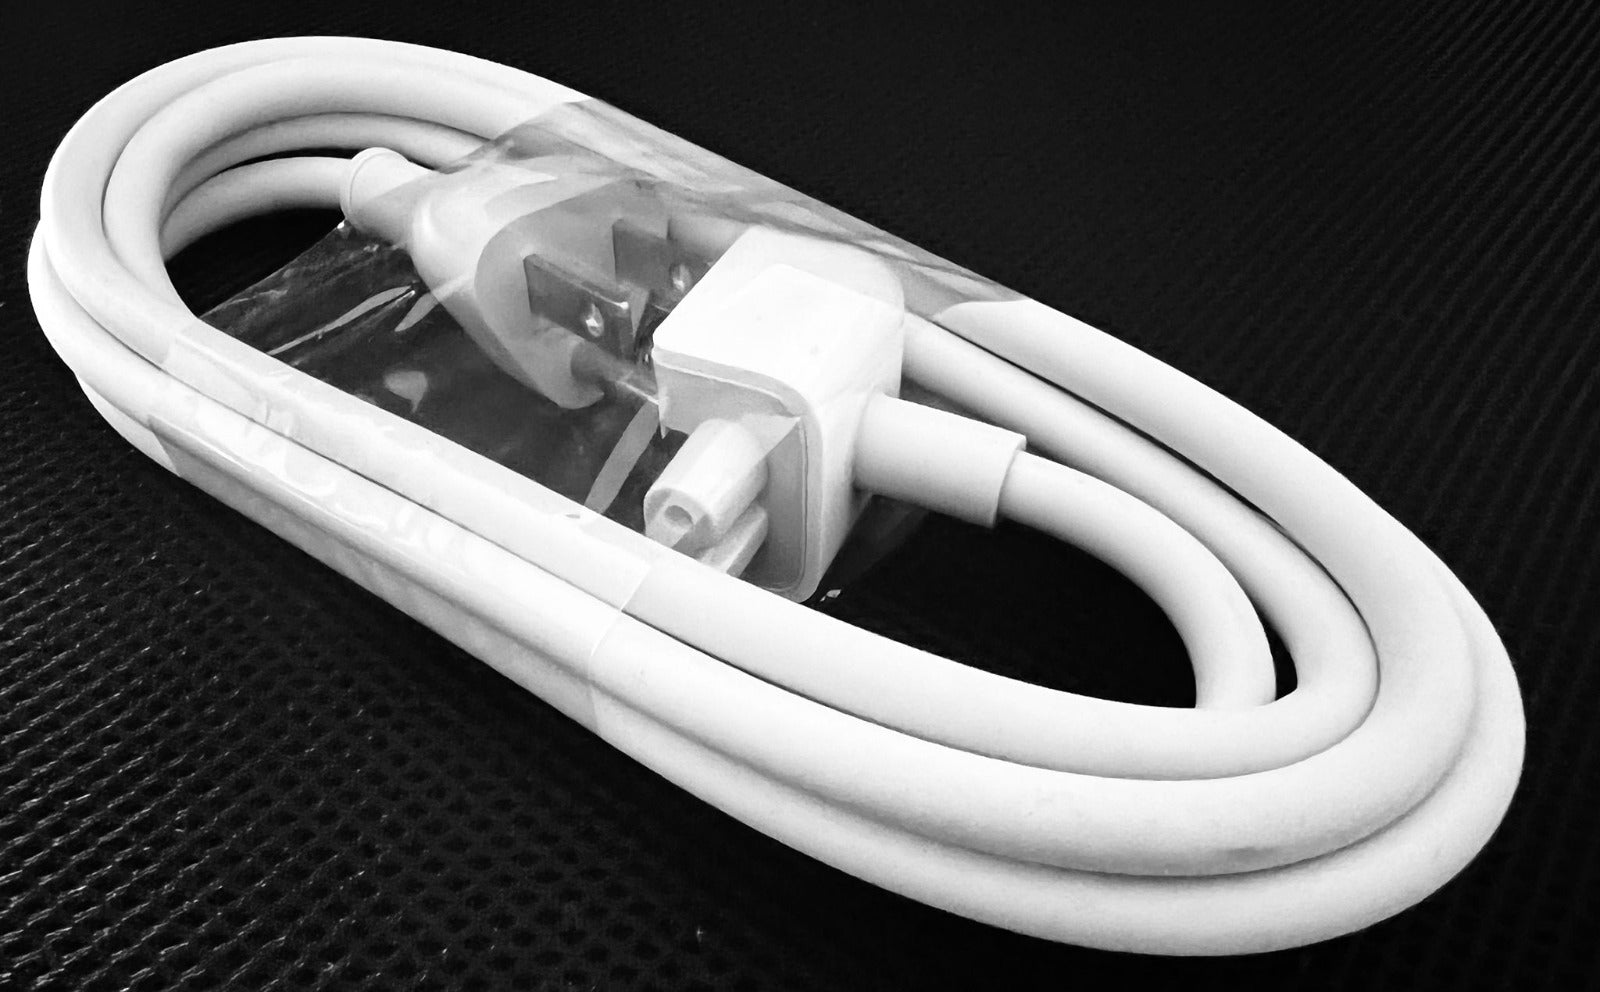 6 Feet US Extension Cord Cable For all Apple MacBook Pro & Macbook air chargers / Power Adapter